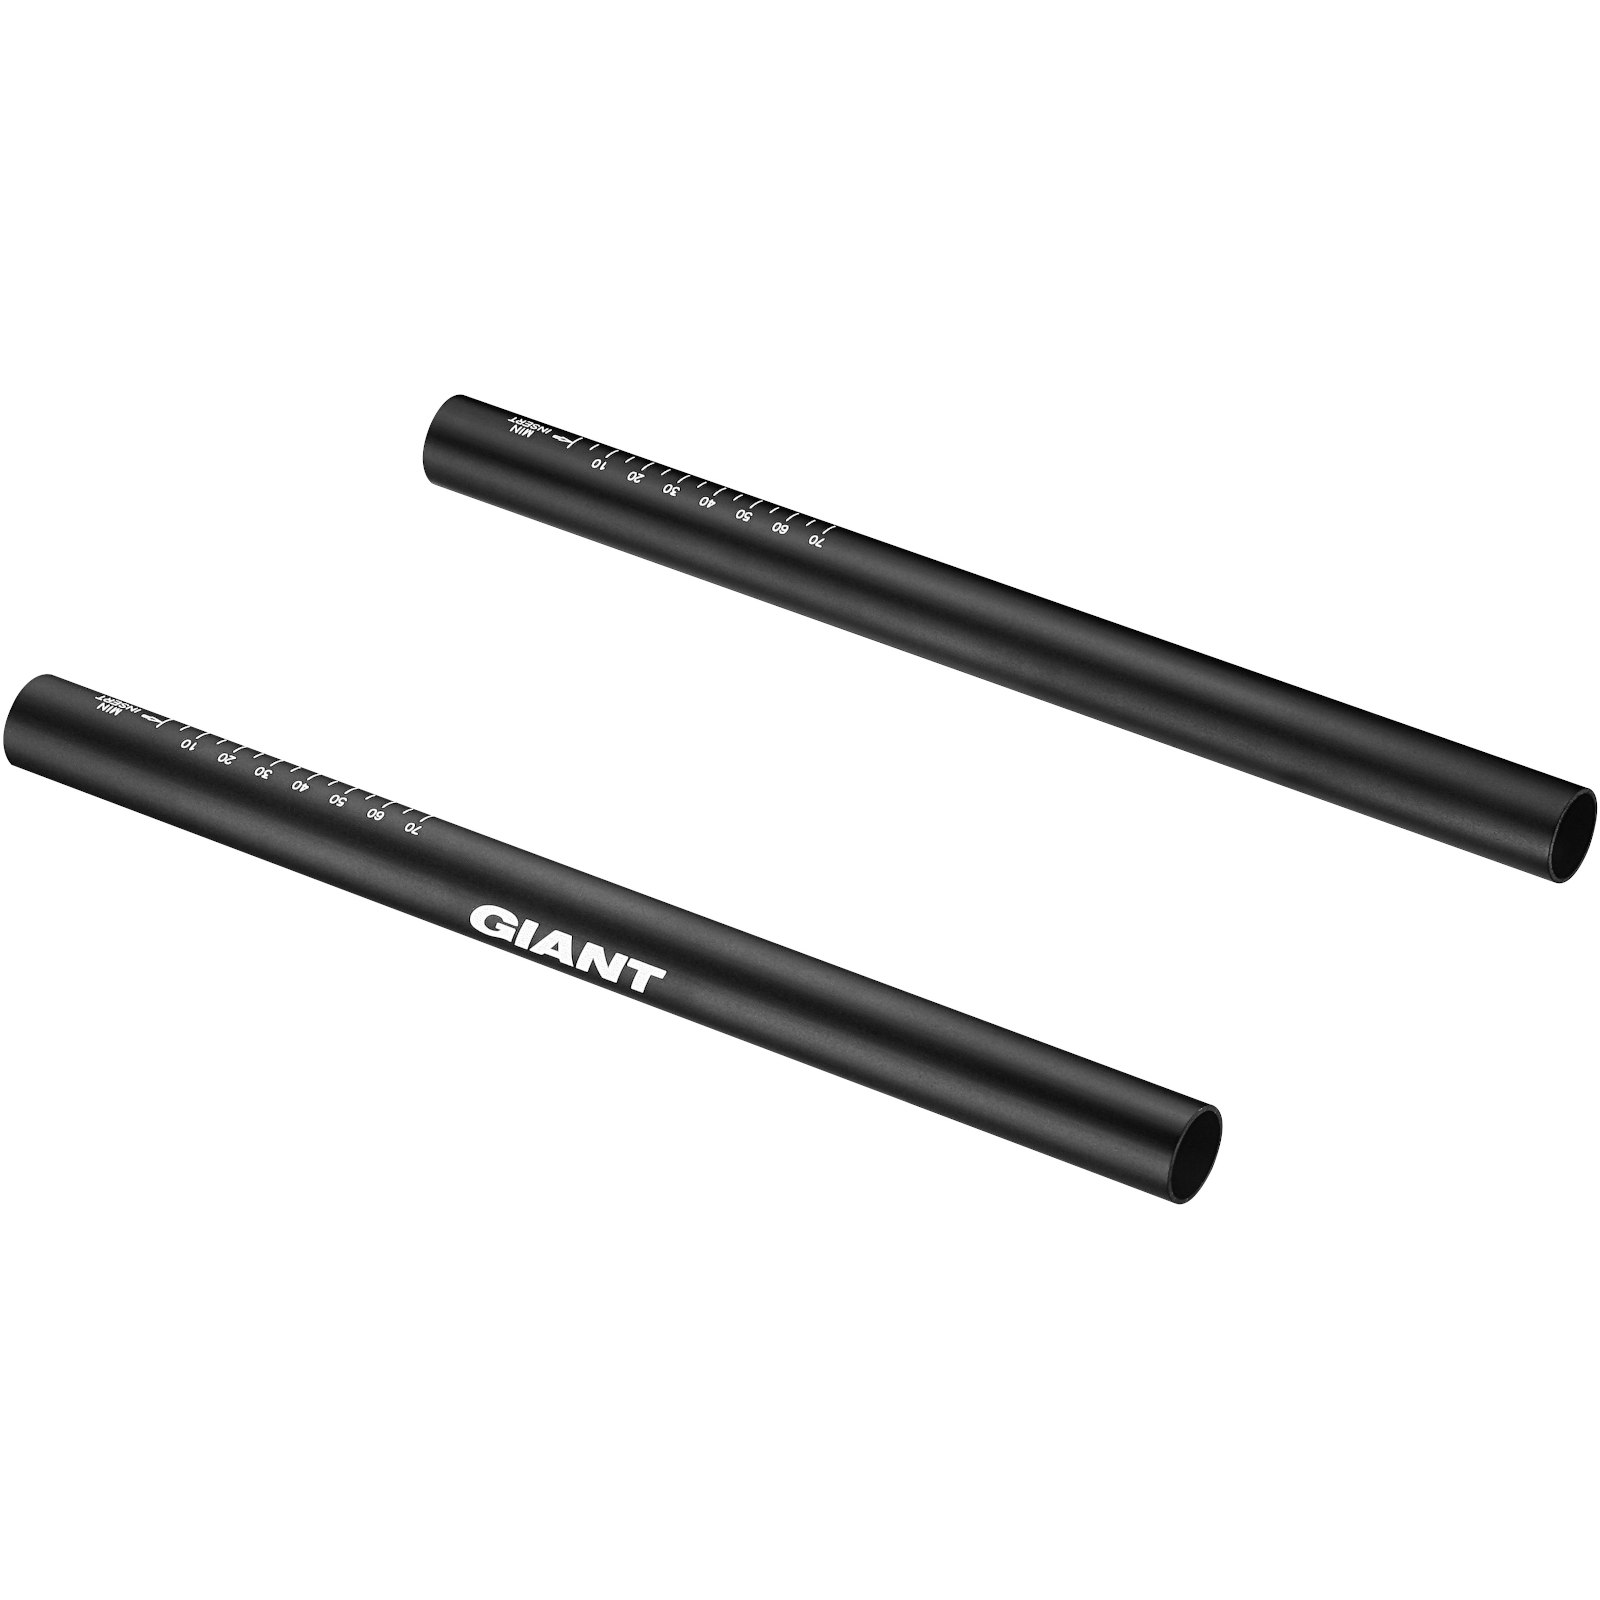 Image of Giant Straight-Type Aluminum Aerobar Extensions